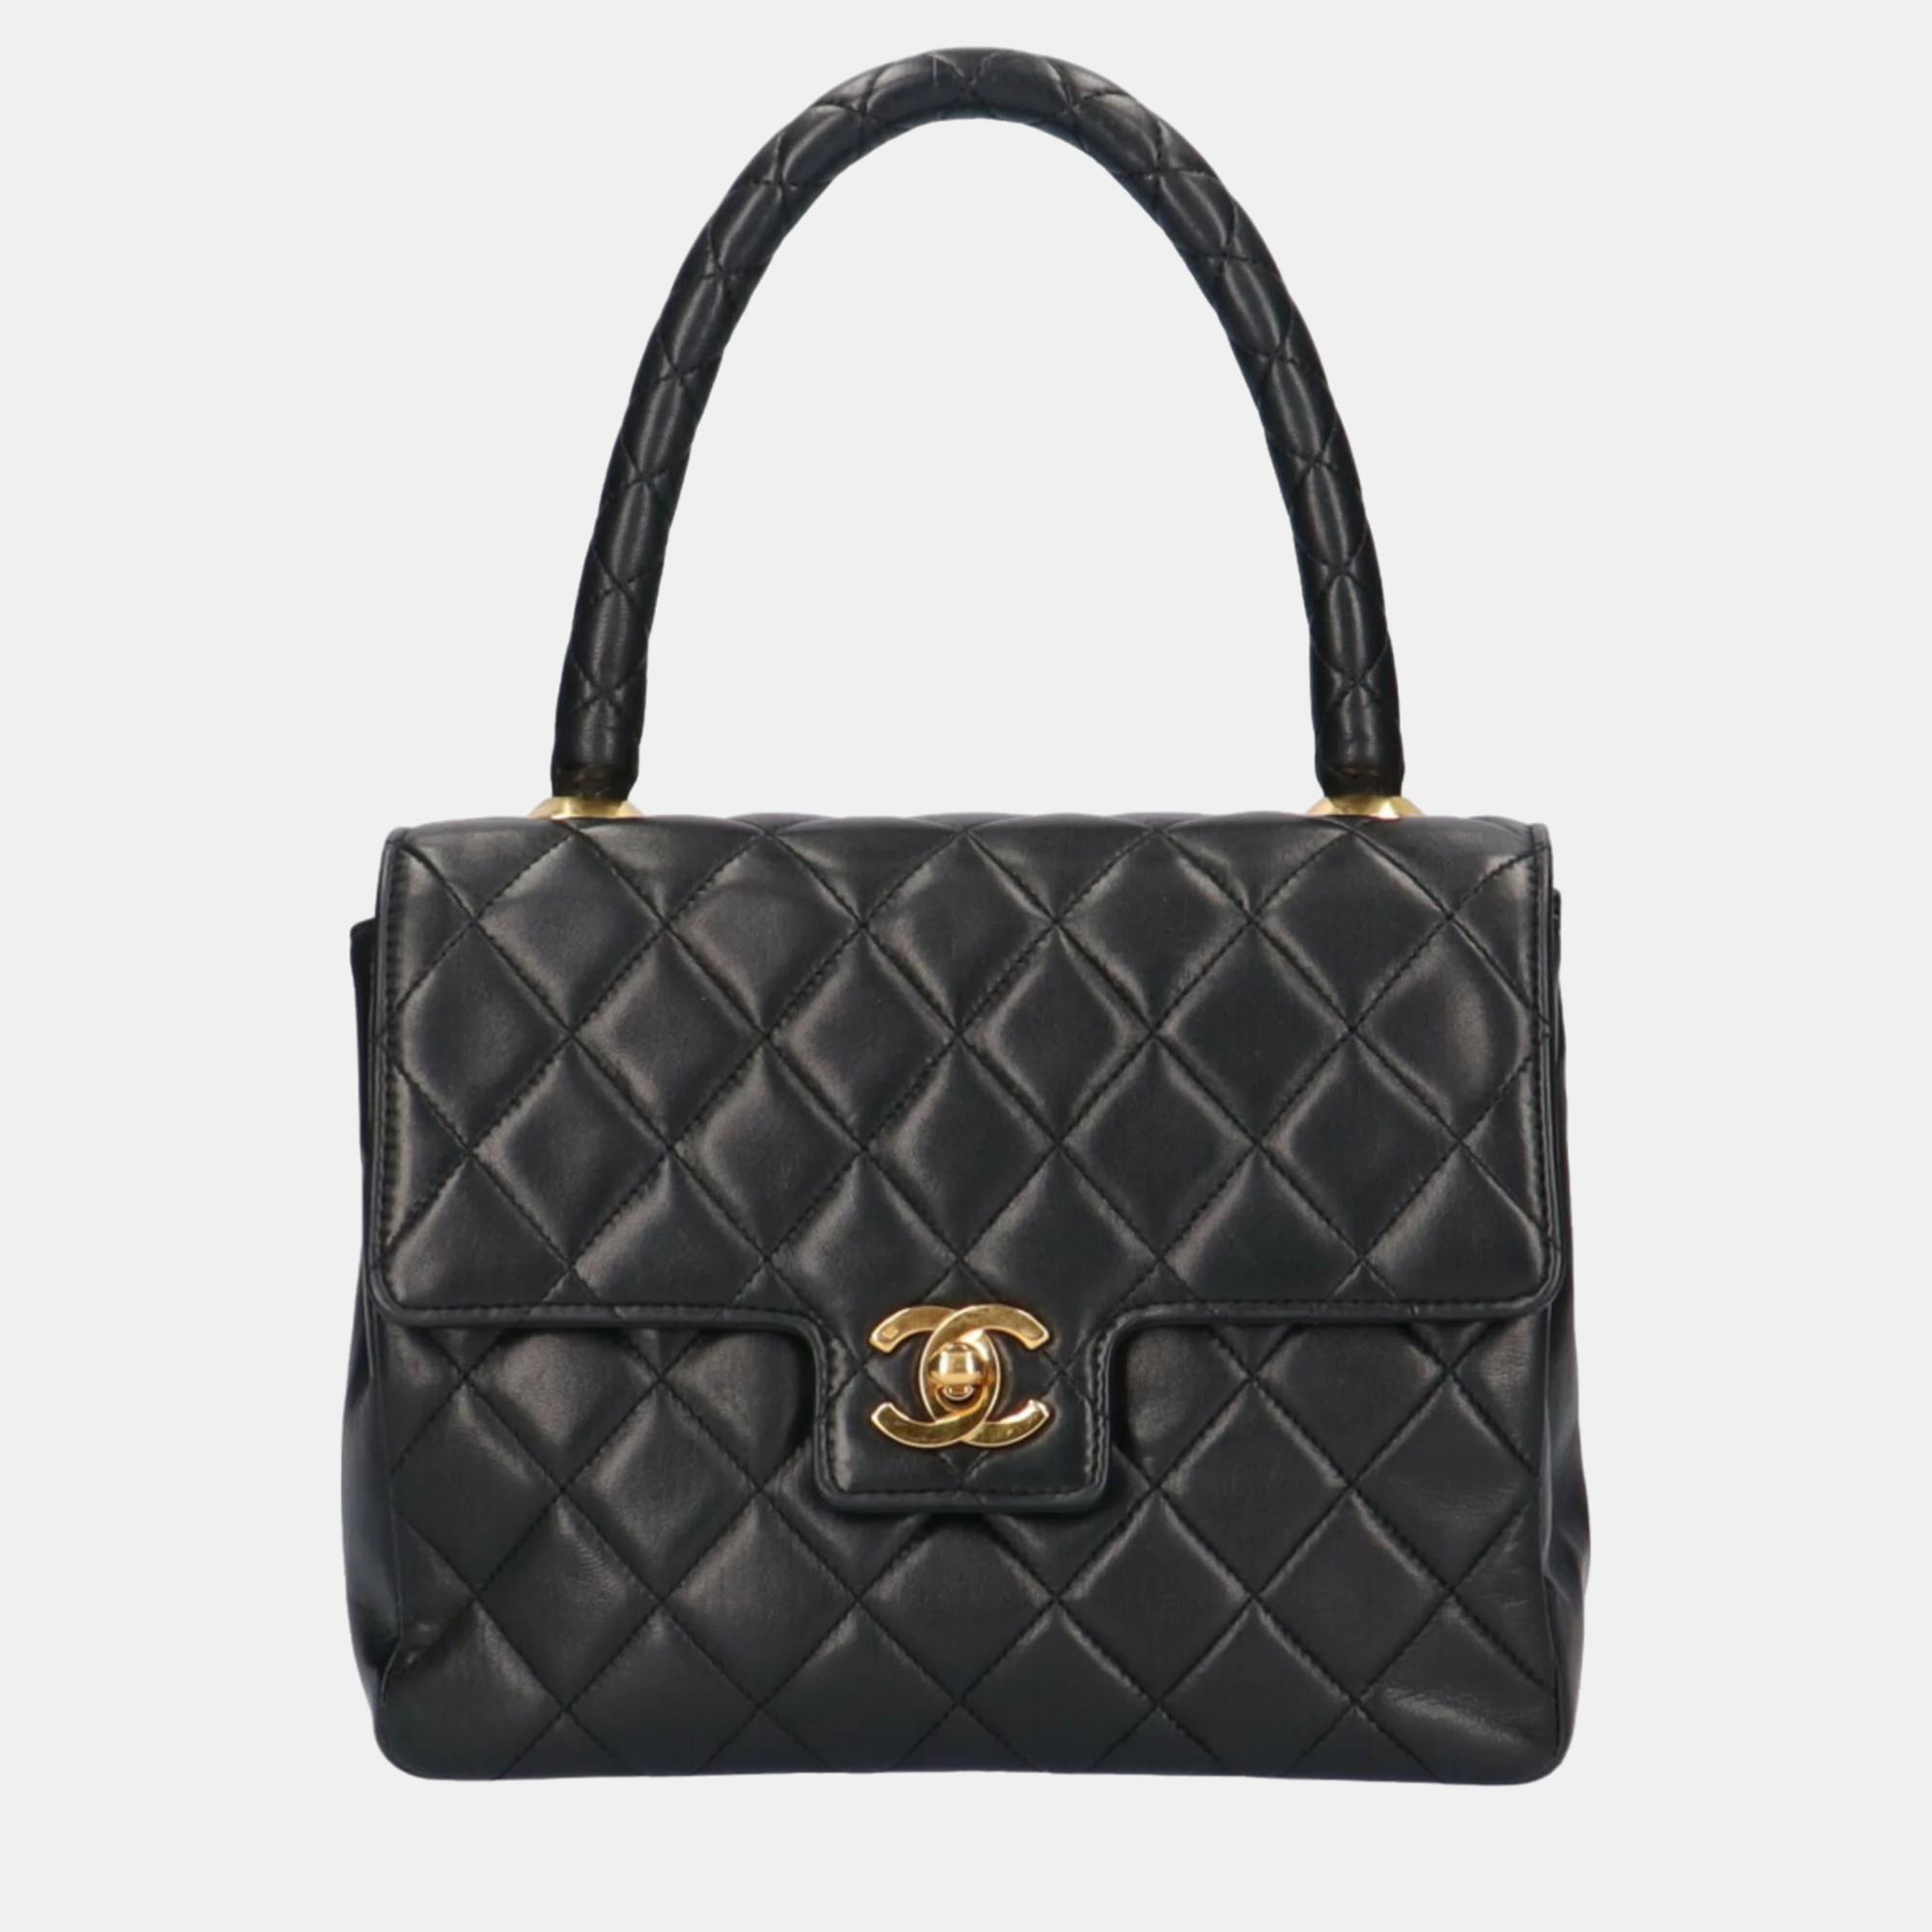 Chanel black leather kelly top handle bag